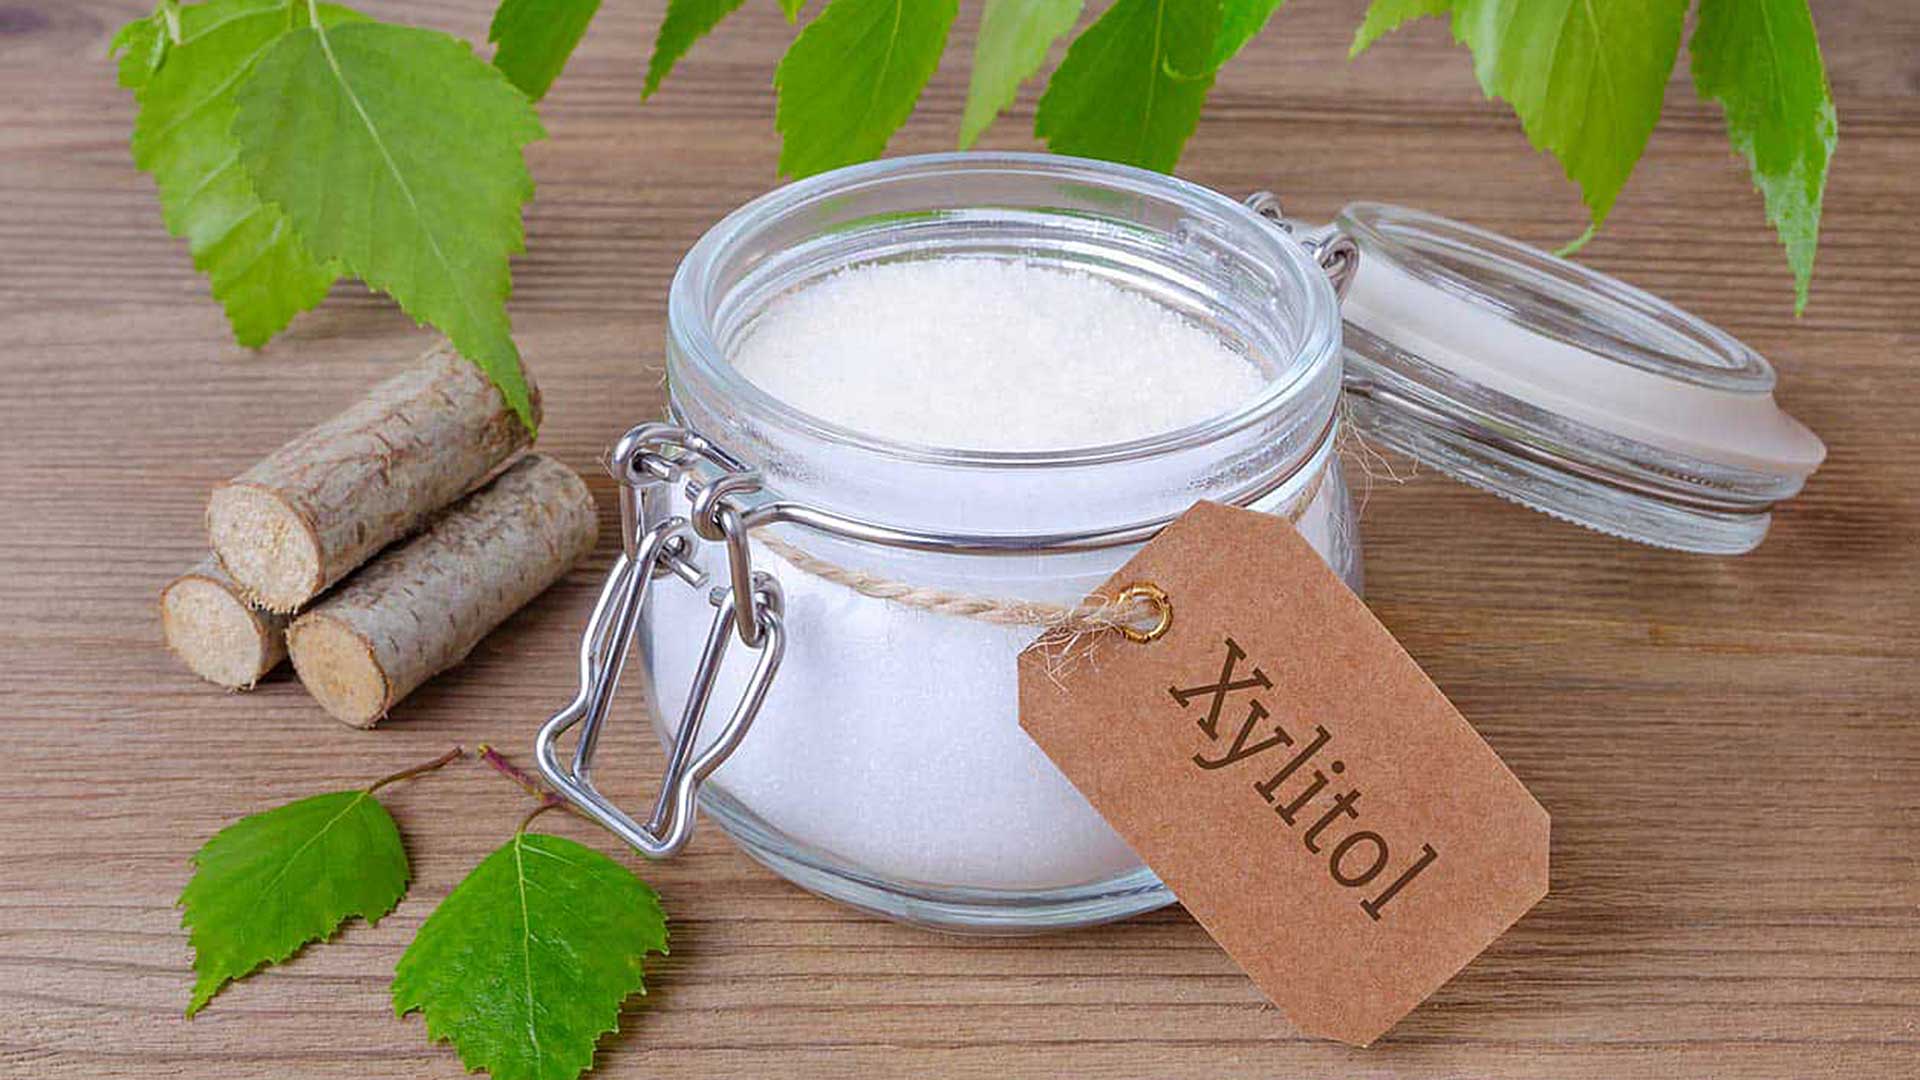 Is Xylitol Safe For My Teeth?